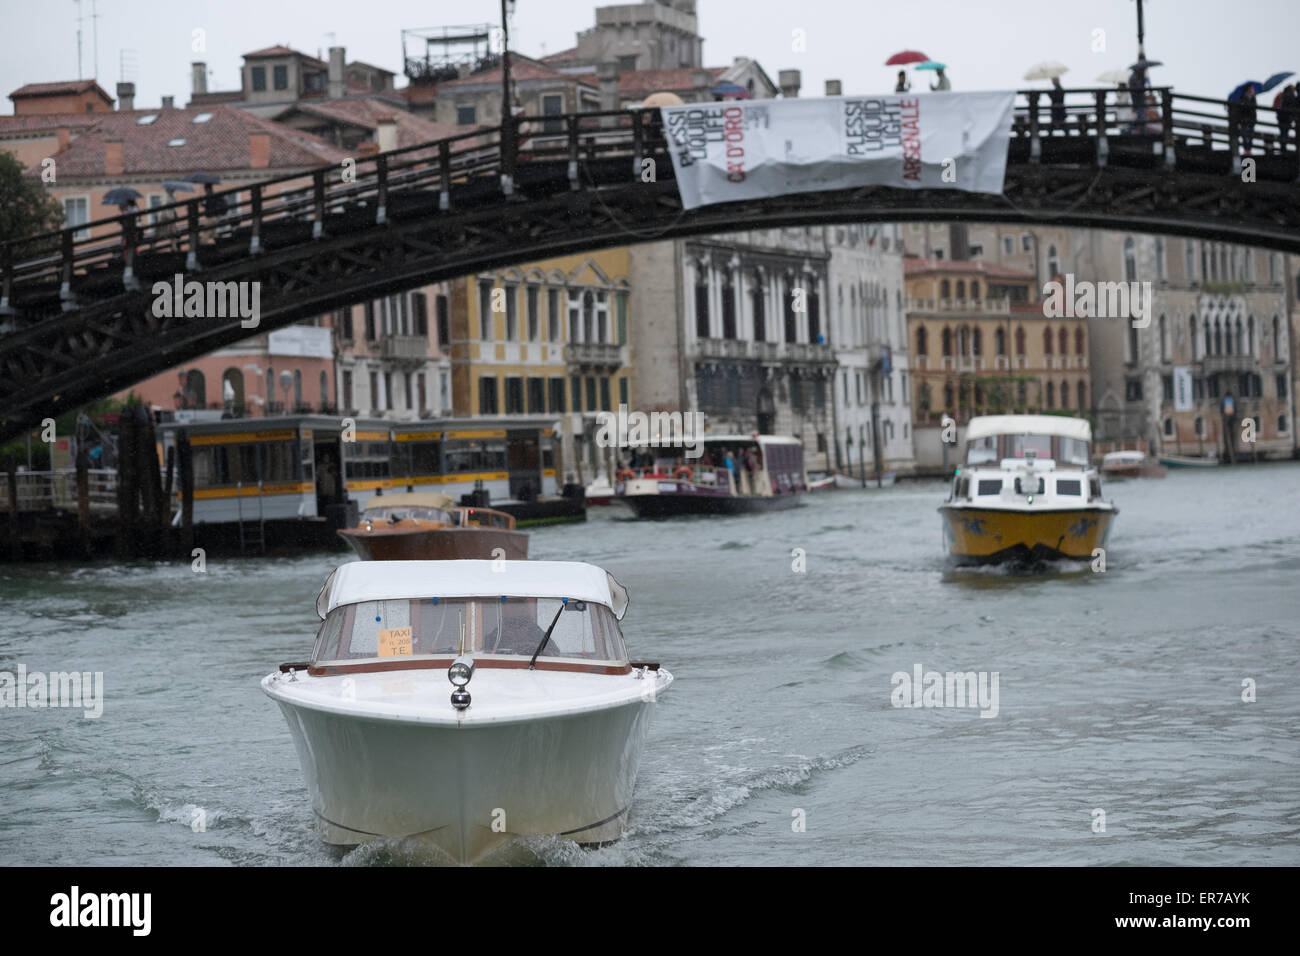 Vaporetto and water taxis on the Grand Canal in Venice Italy. Stock Photo